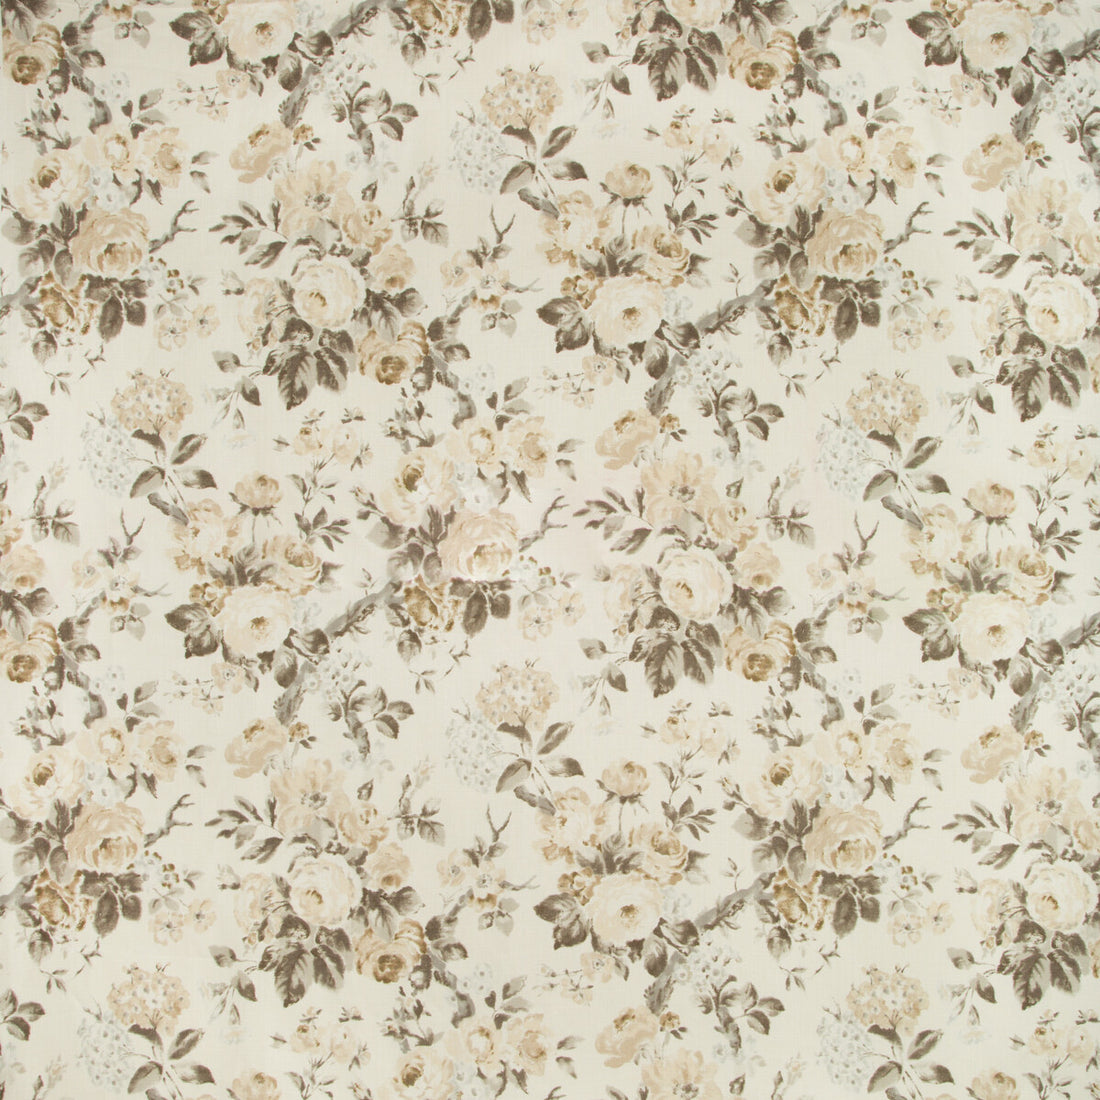 Garden Roses fabric in sand/sable color - pattern 2007157.116.0 - by Lee Jofa in the Suzanne Rheinstein III collection